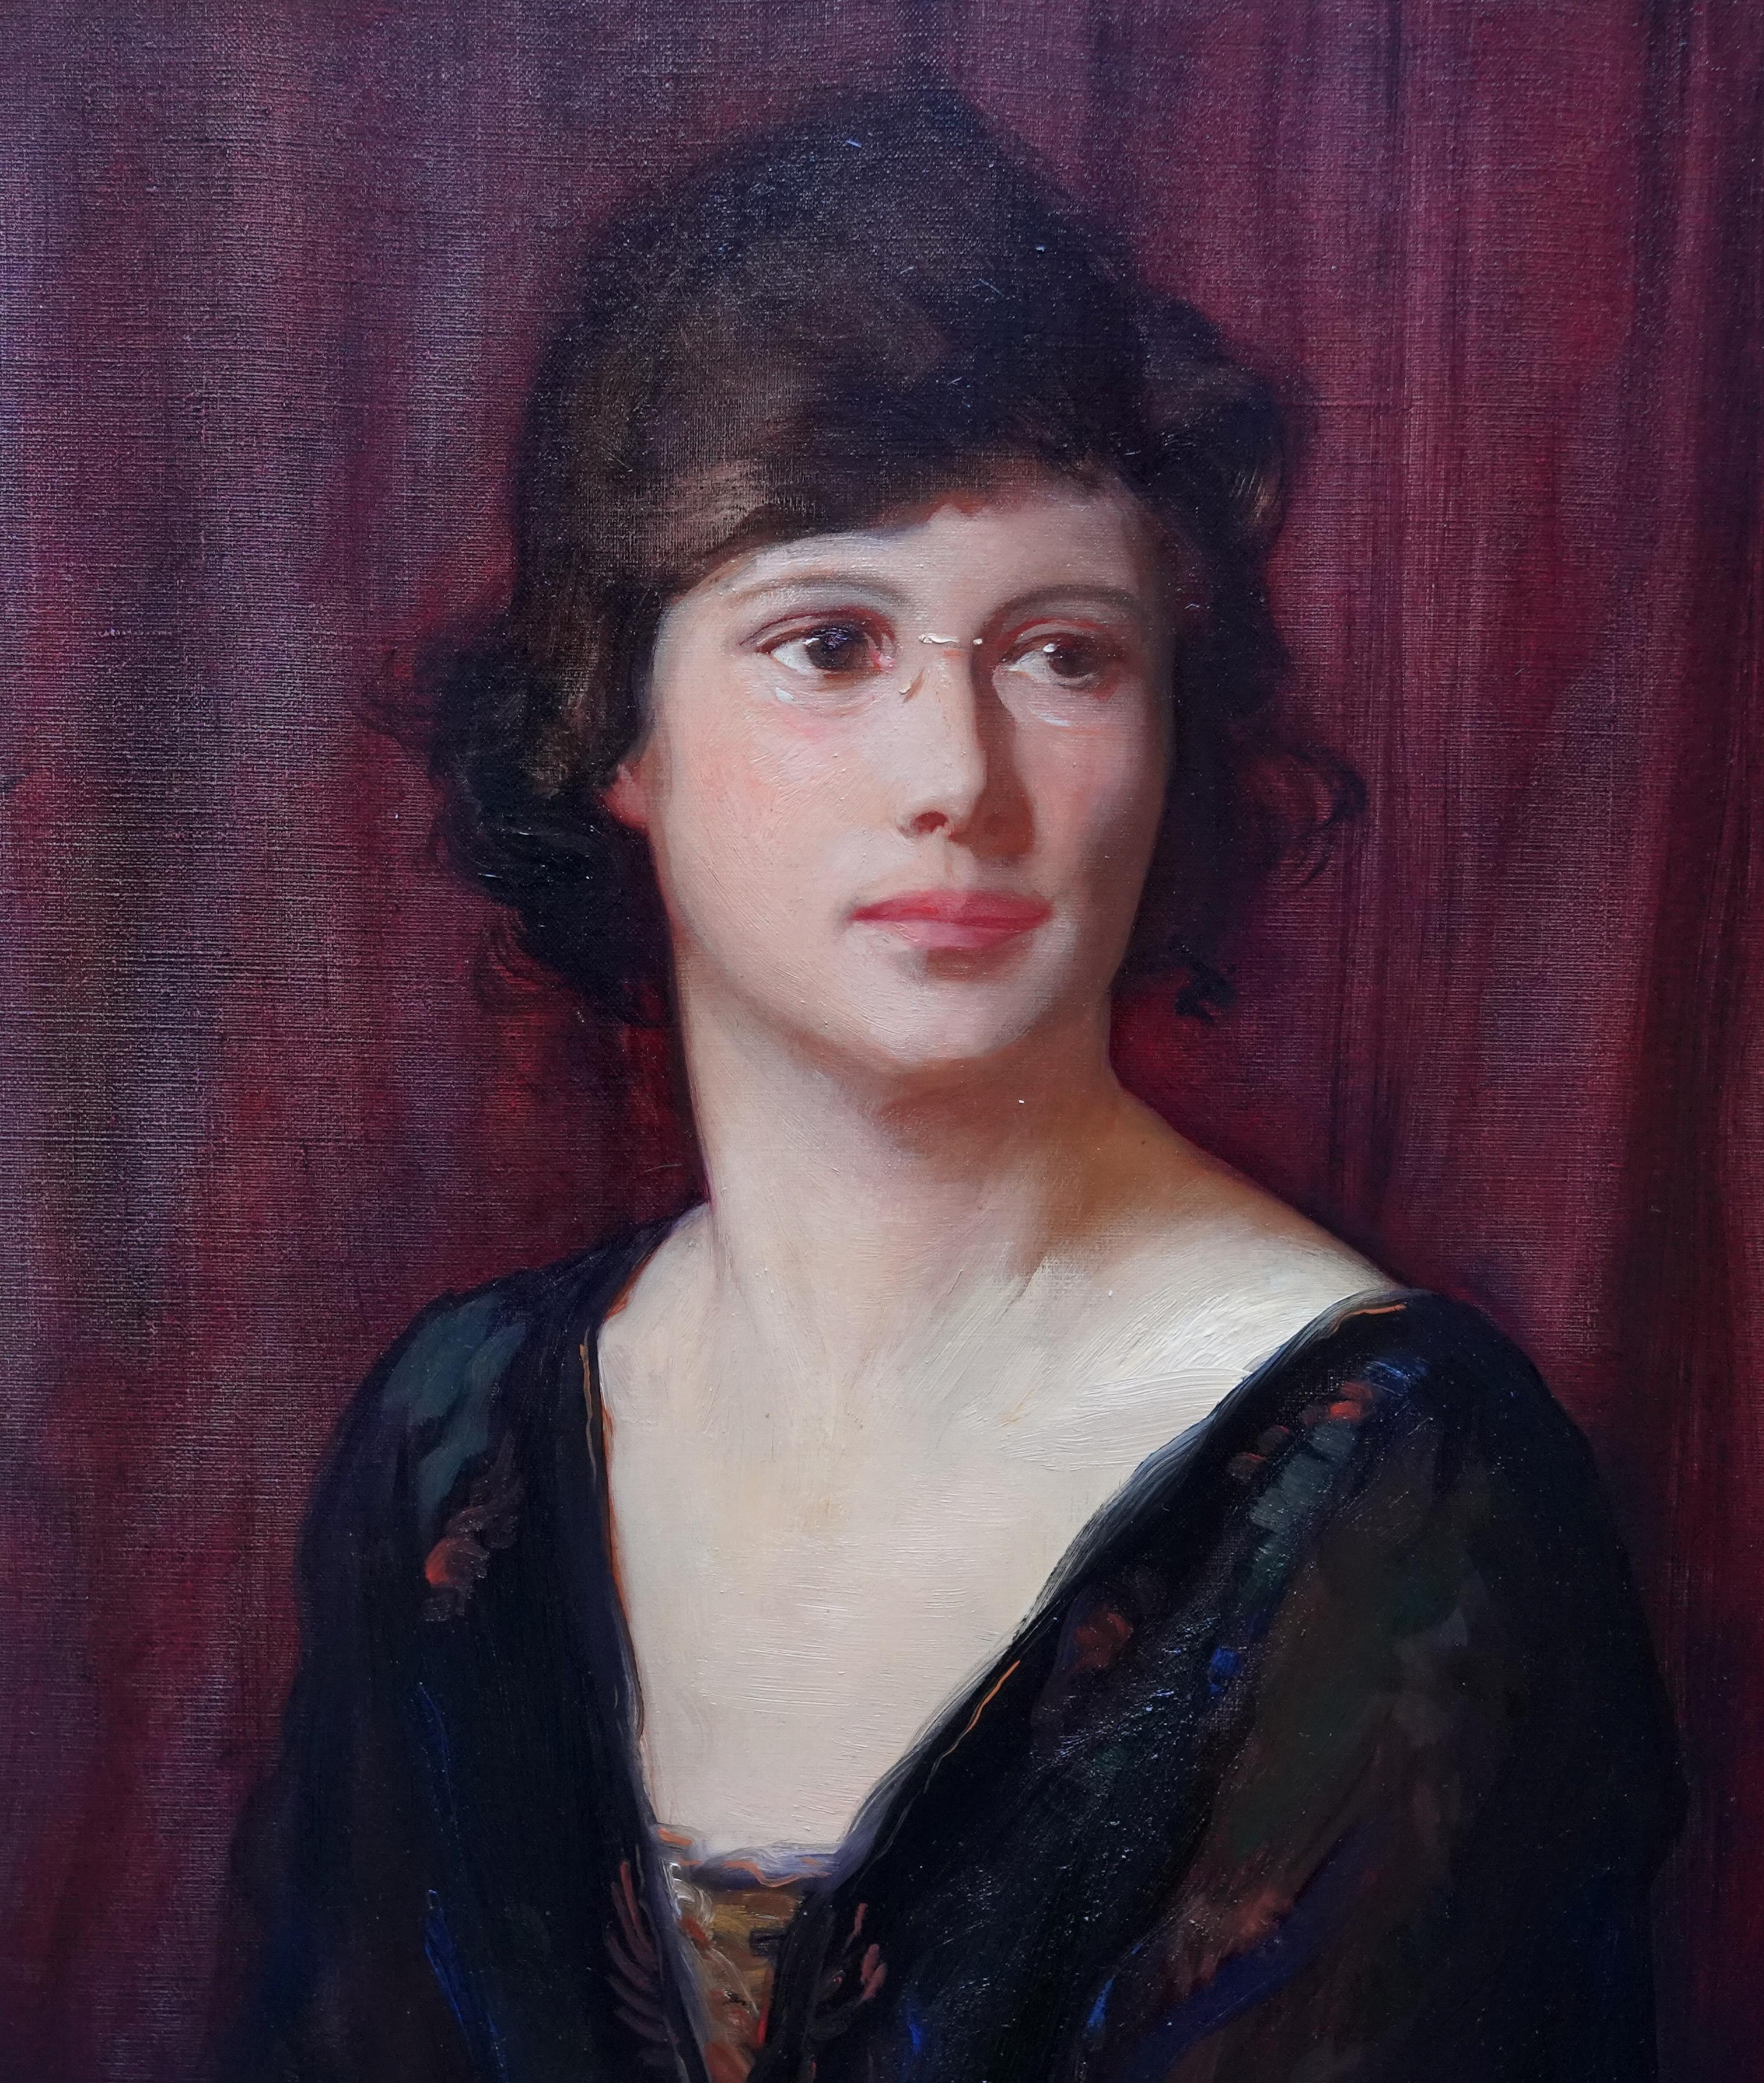 This superb British portrait oil painting is by noted artist Alfred Kinglsey Lawrence. Painted in 1919 it is a seated portrait of a young woman with a lush burgundy velvet curtain behind her that really zings in colour. She is wearing a black lace